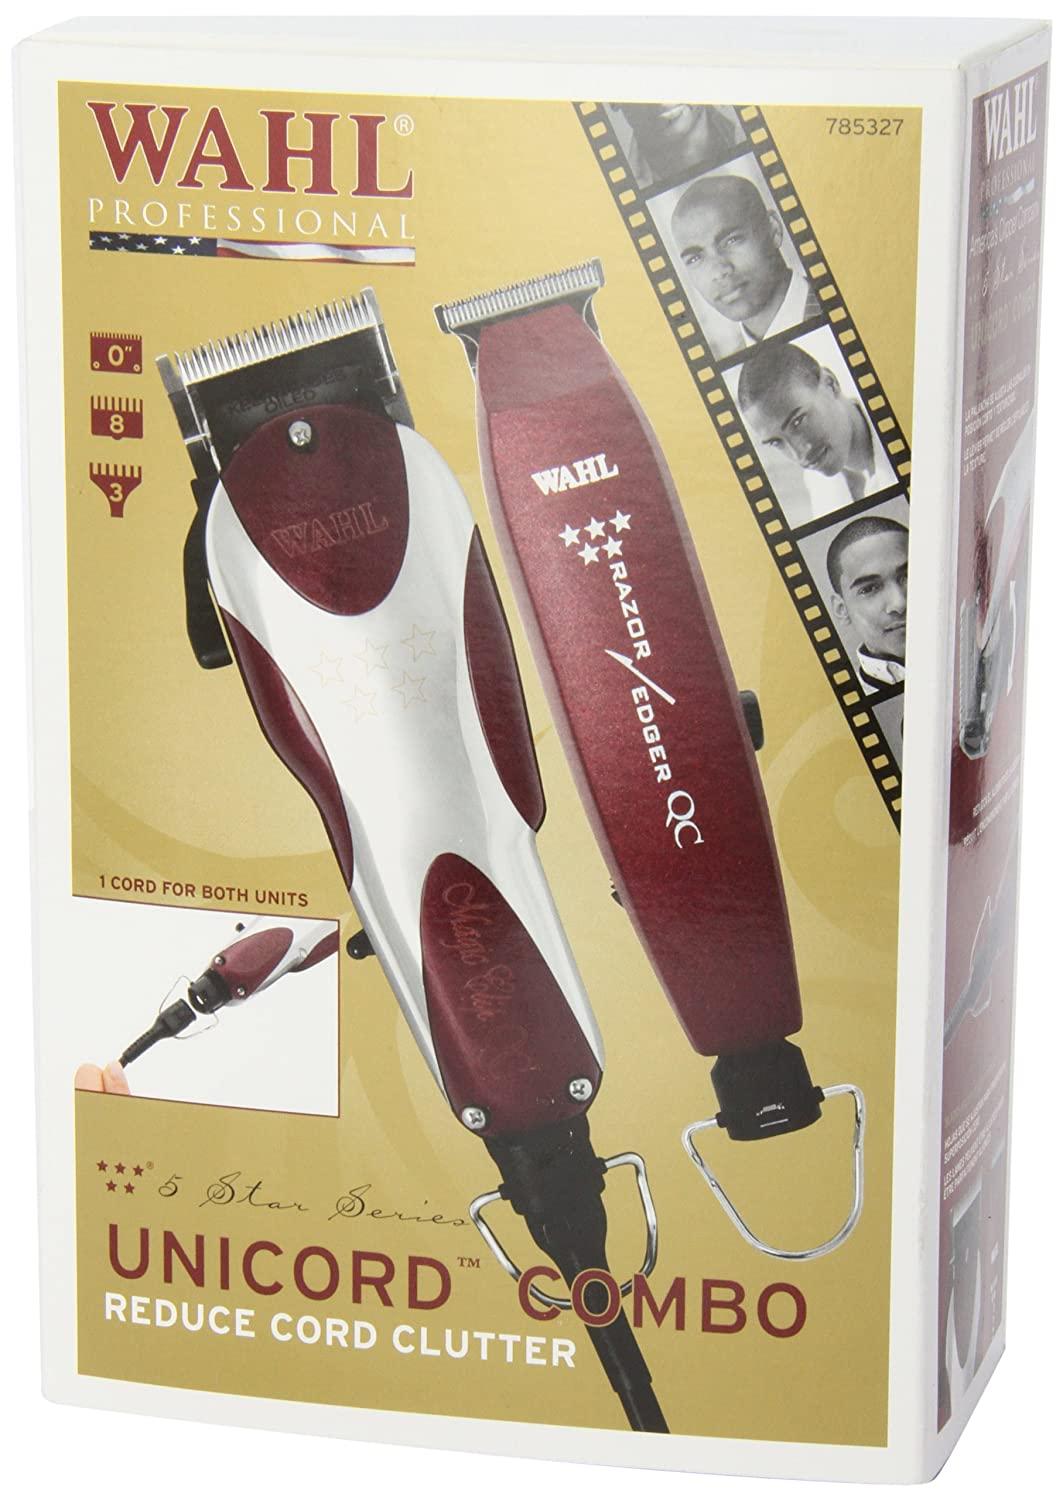 Wahl Professional 5 Star Unicord Combo with Corded Magic Clip Clipper and  Razor Edger Trimmer for Professional Barbers and Stylists